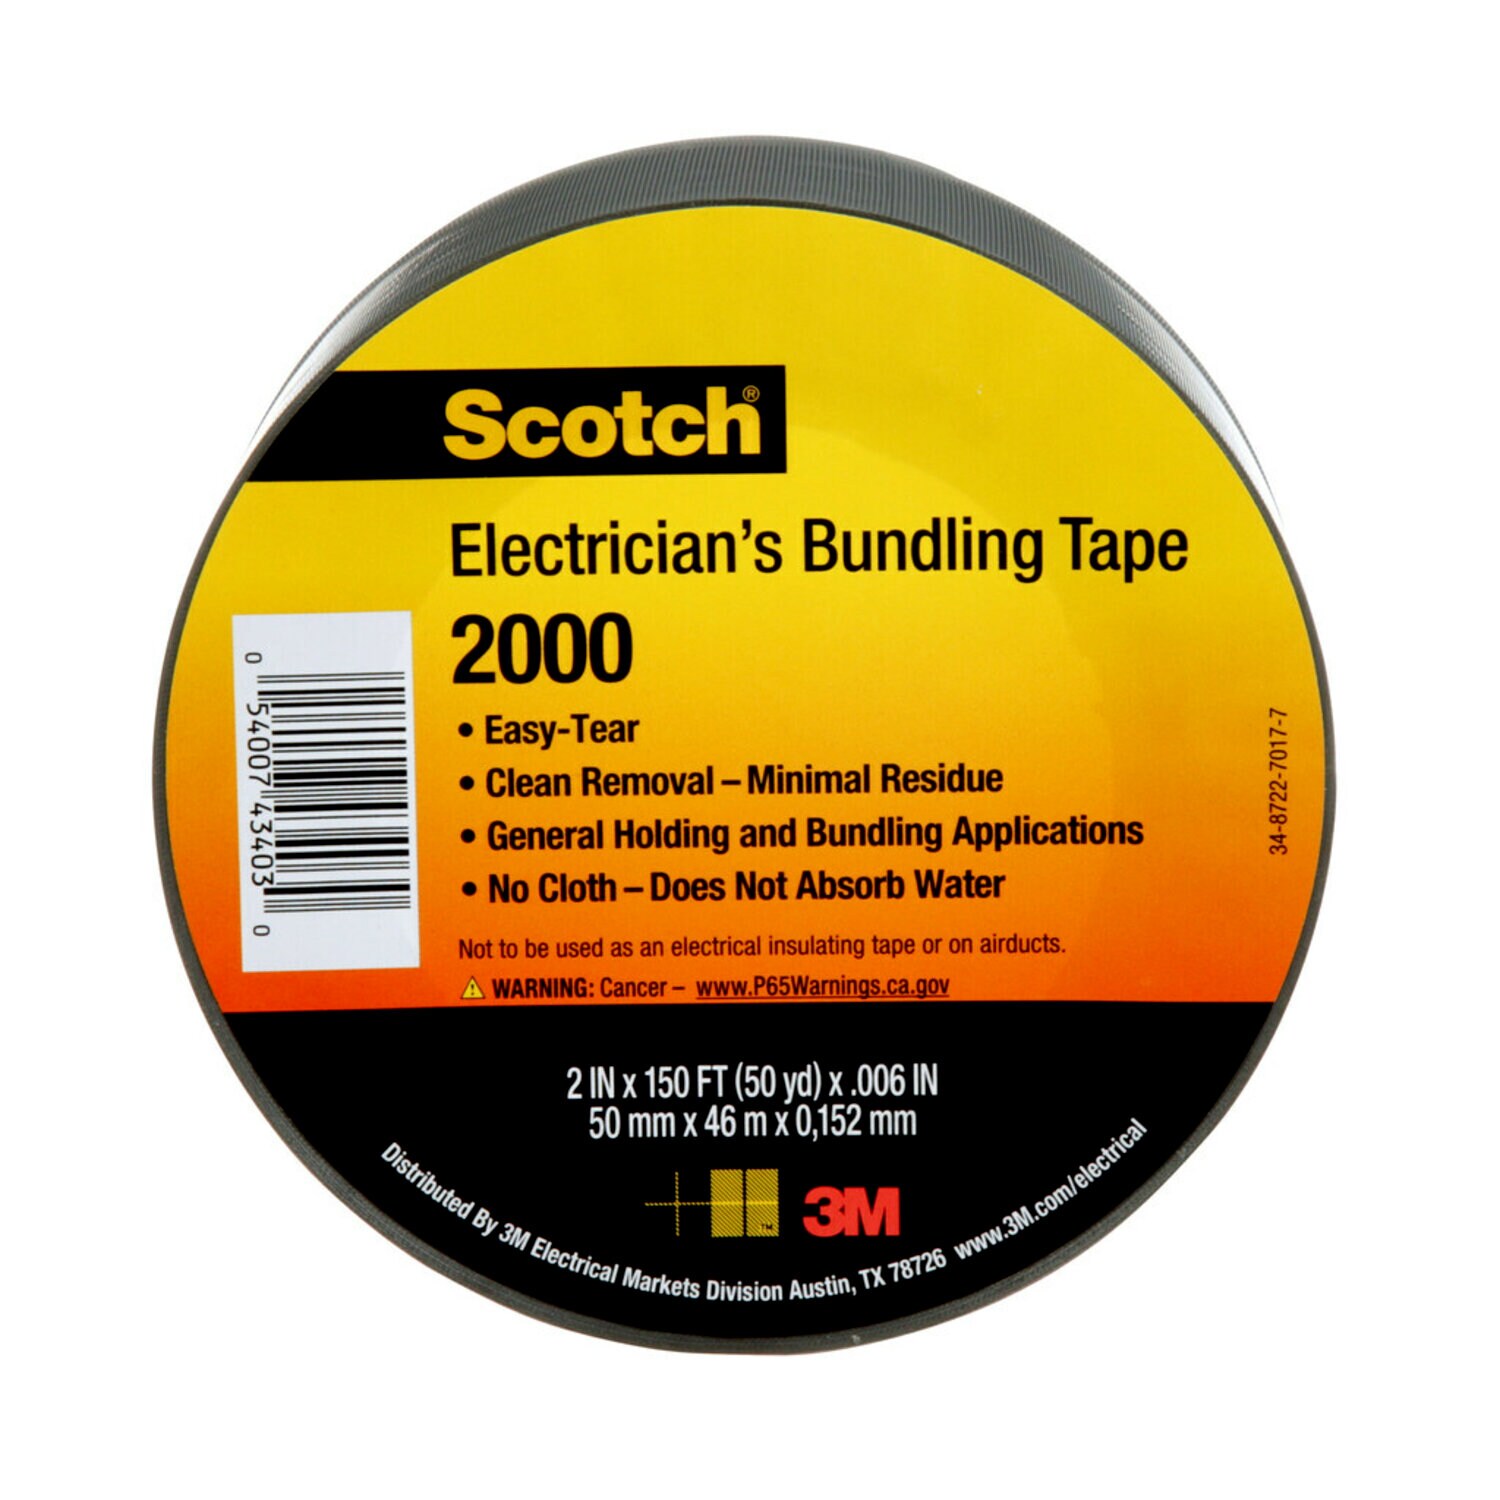 7000031684 - Scotch Electricians Duct Tape 2000, 2 in x 50 yd, 12 Roll Display, 12
Rolls/Case